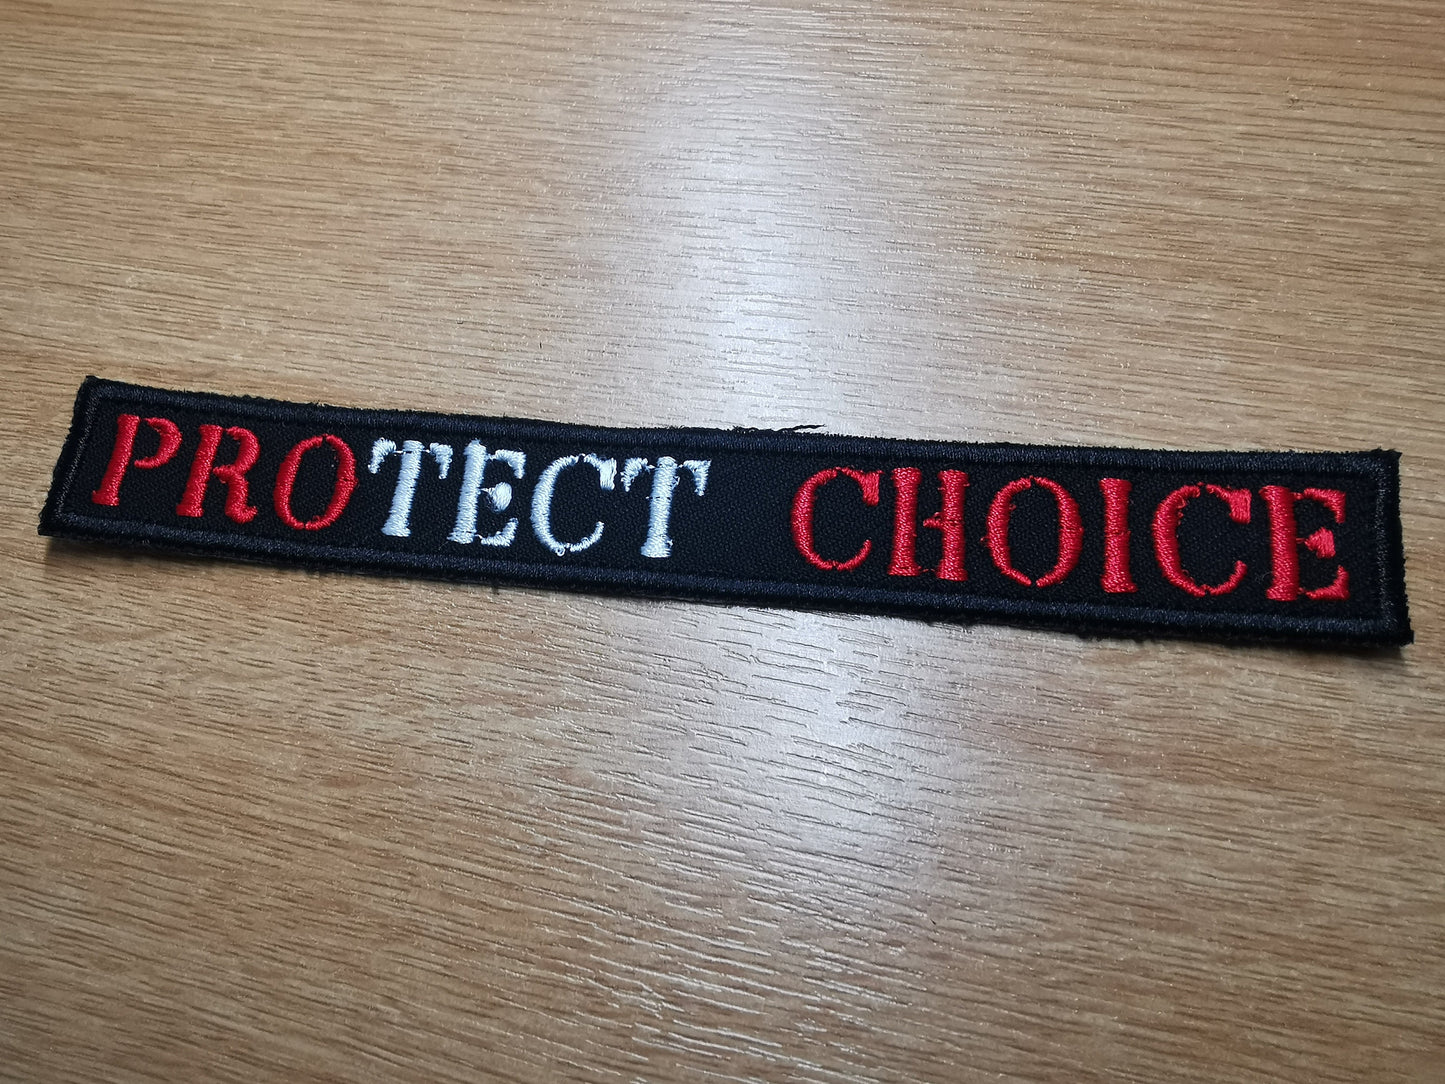 Protect Choice Pro Choice Feminist Long Banner Embroidered Iron On Patch Collection Abortion Politics Punk